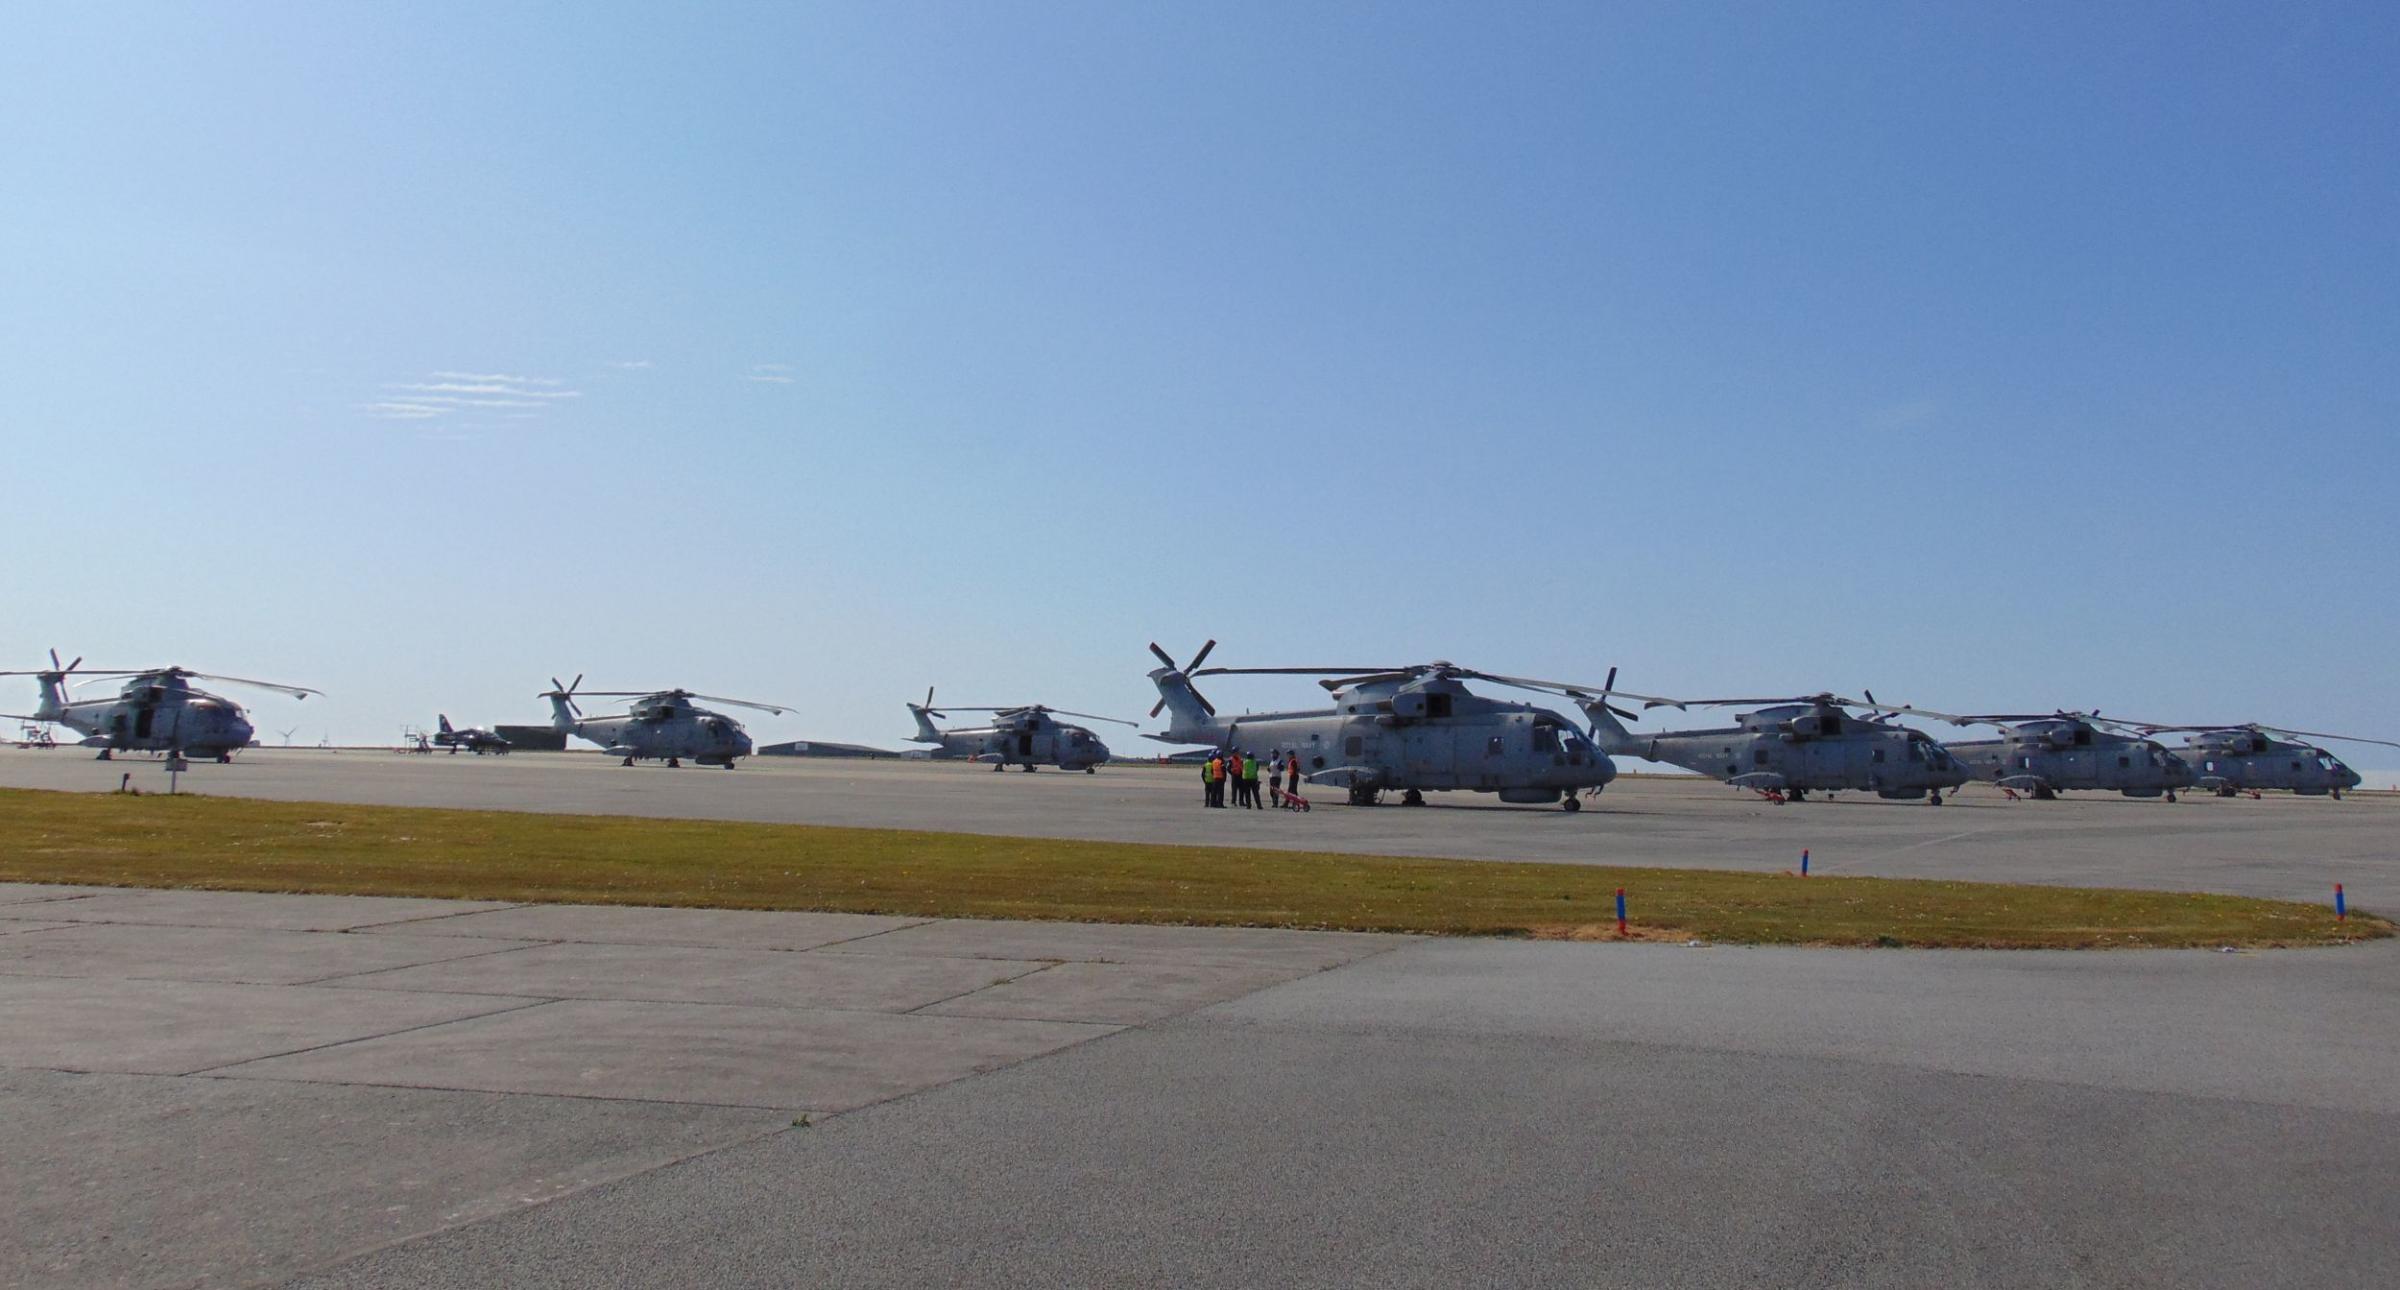 The helicopters lined up on the tarmac